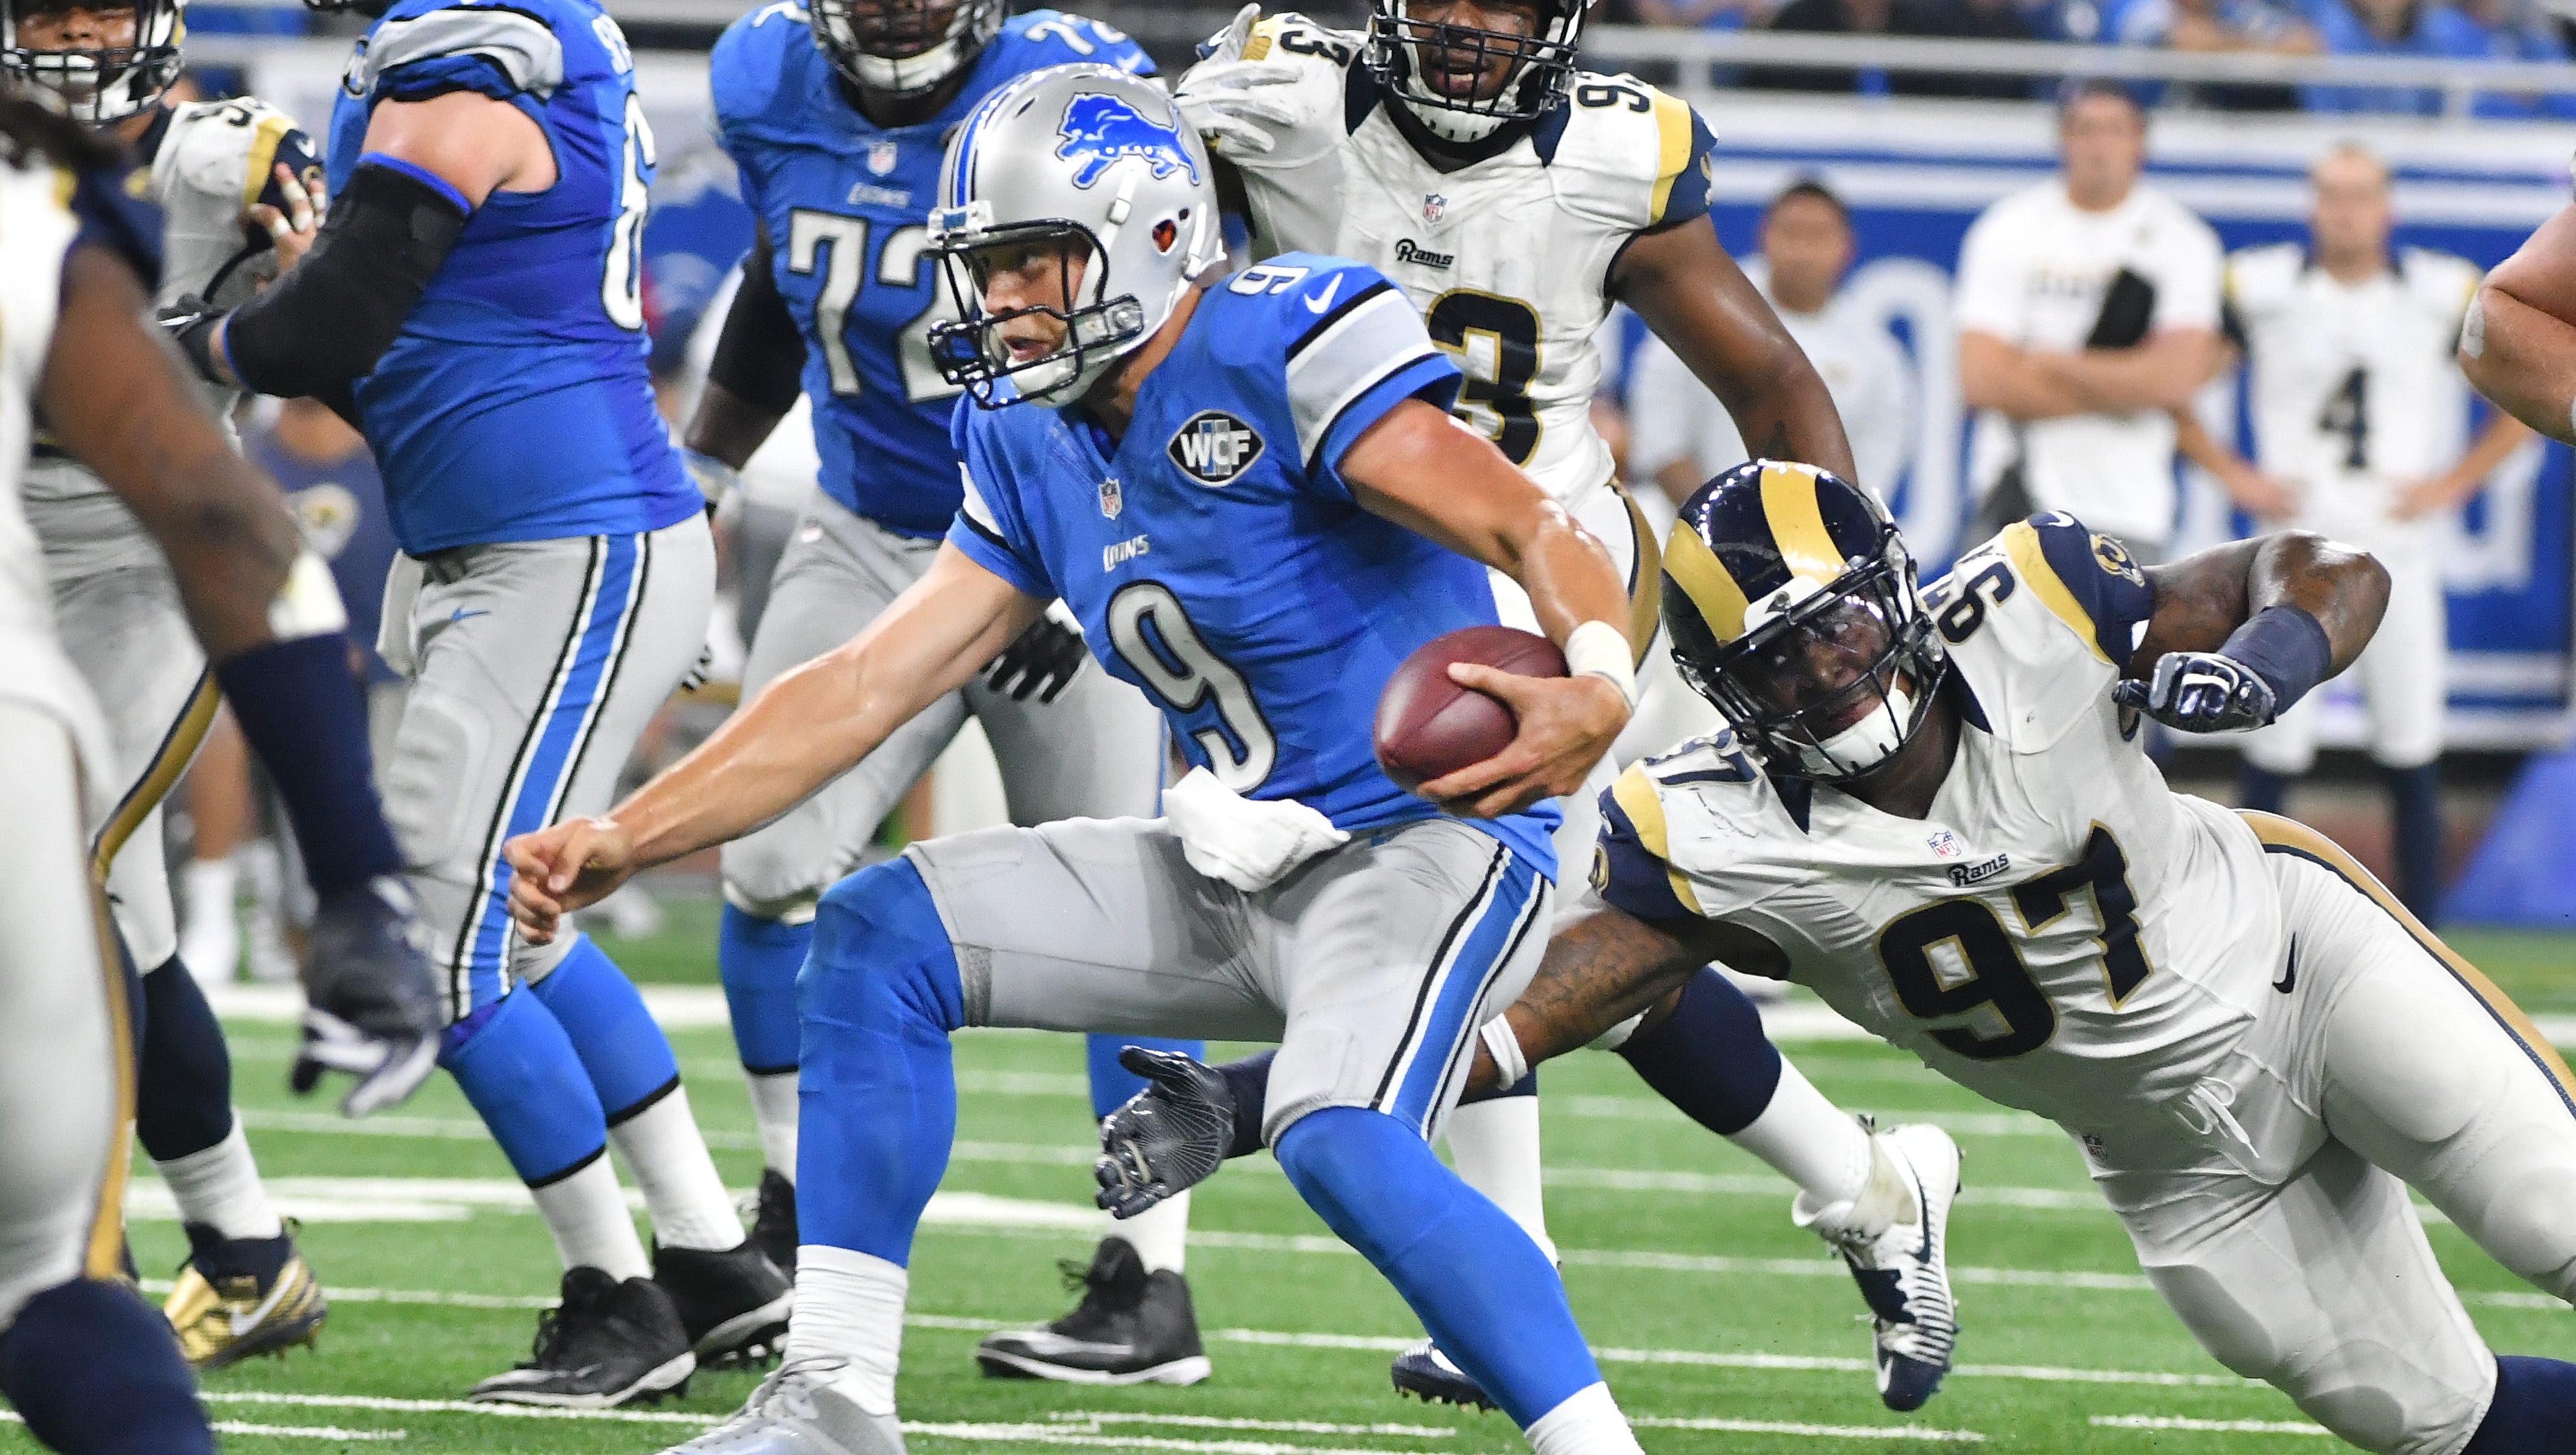 Lions quarterback Matthew Stafford scrambles away from Rams Eugene Sims for a first down late in the fourth quarter.